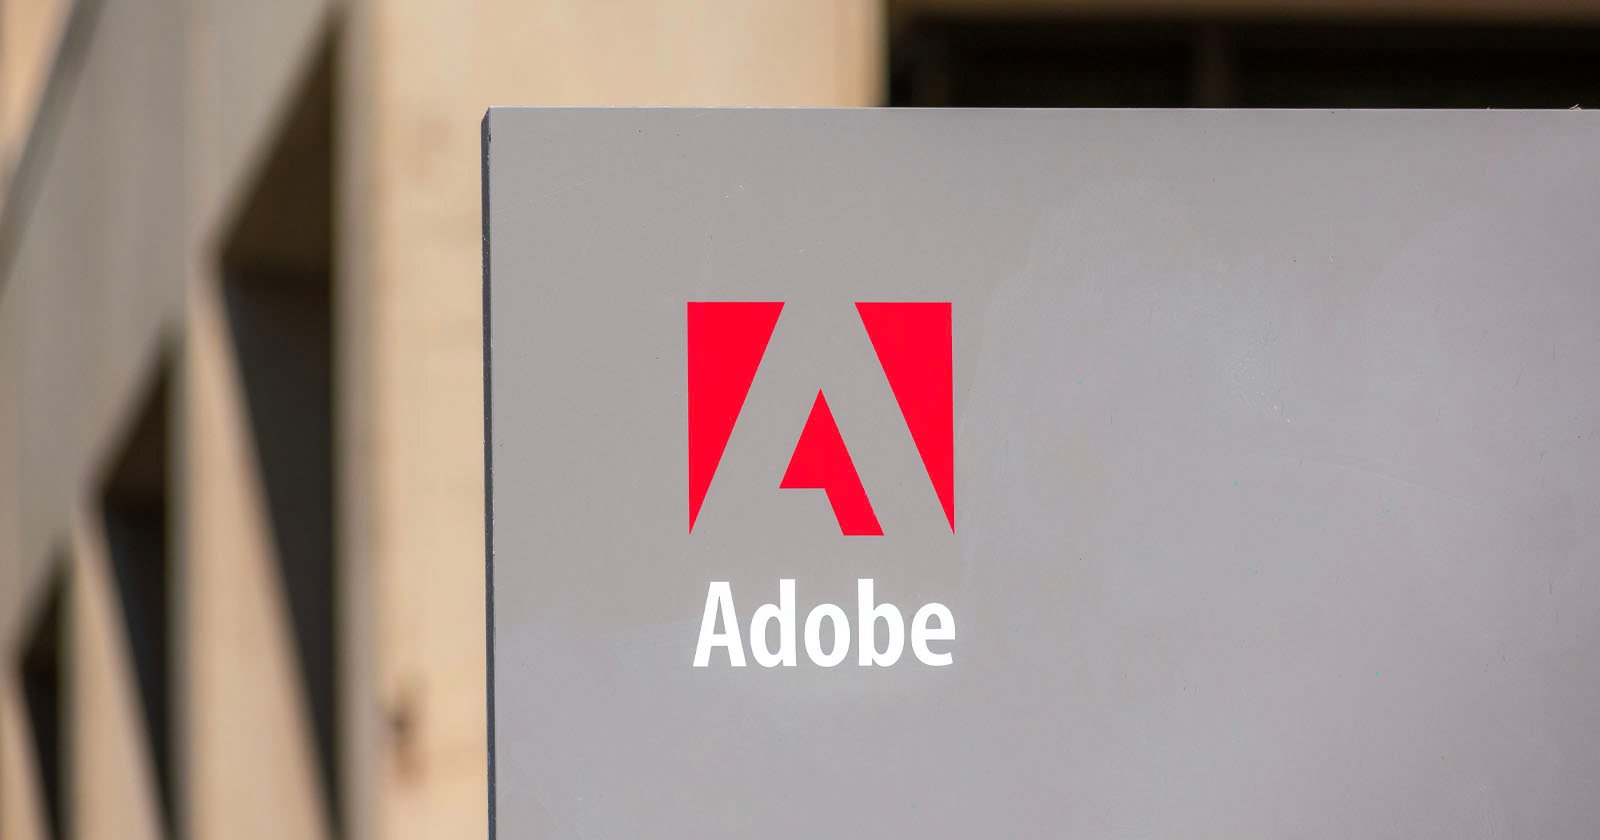 Adobe’s Employees Are Just As Upset at the Company As Its Users: Report